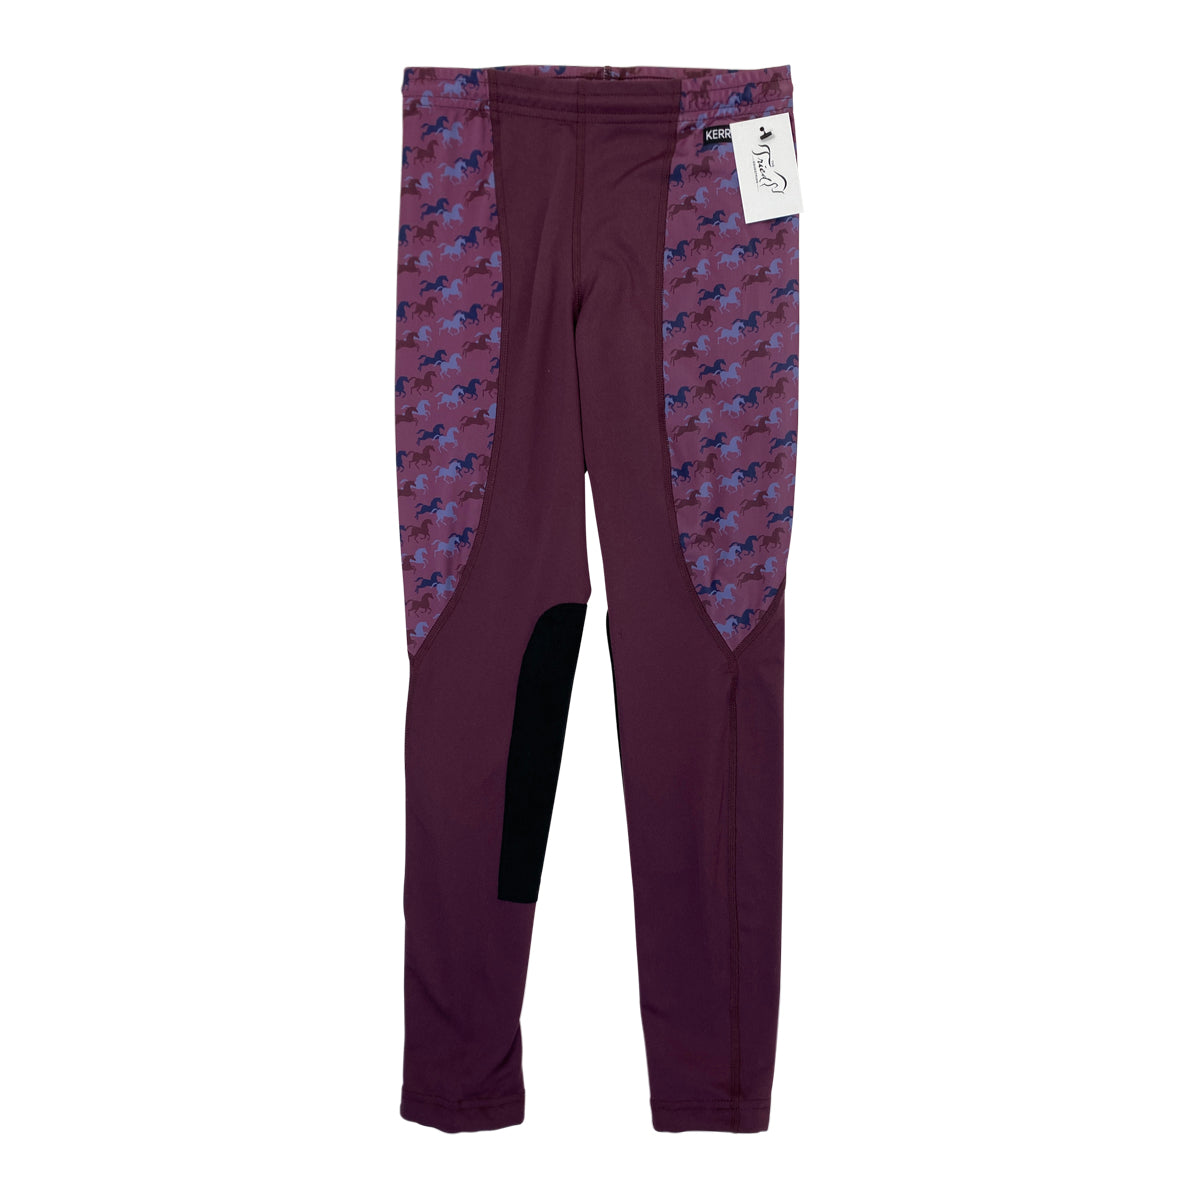 Kerrits Knee Patch Performance Tights in Huckleberry/Horses